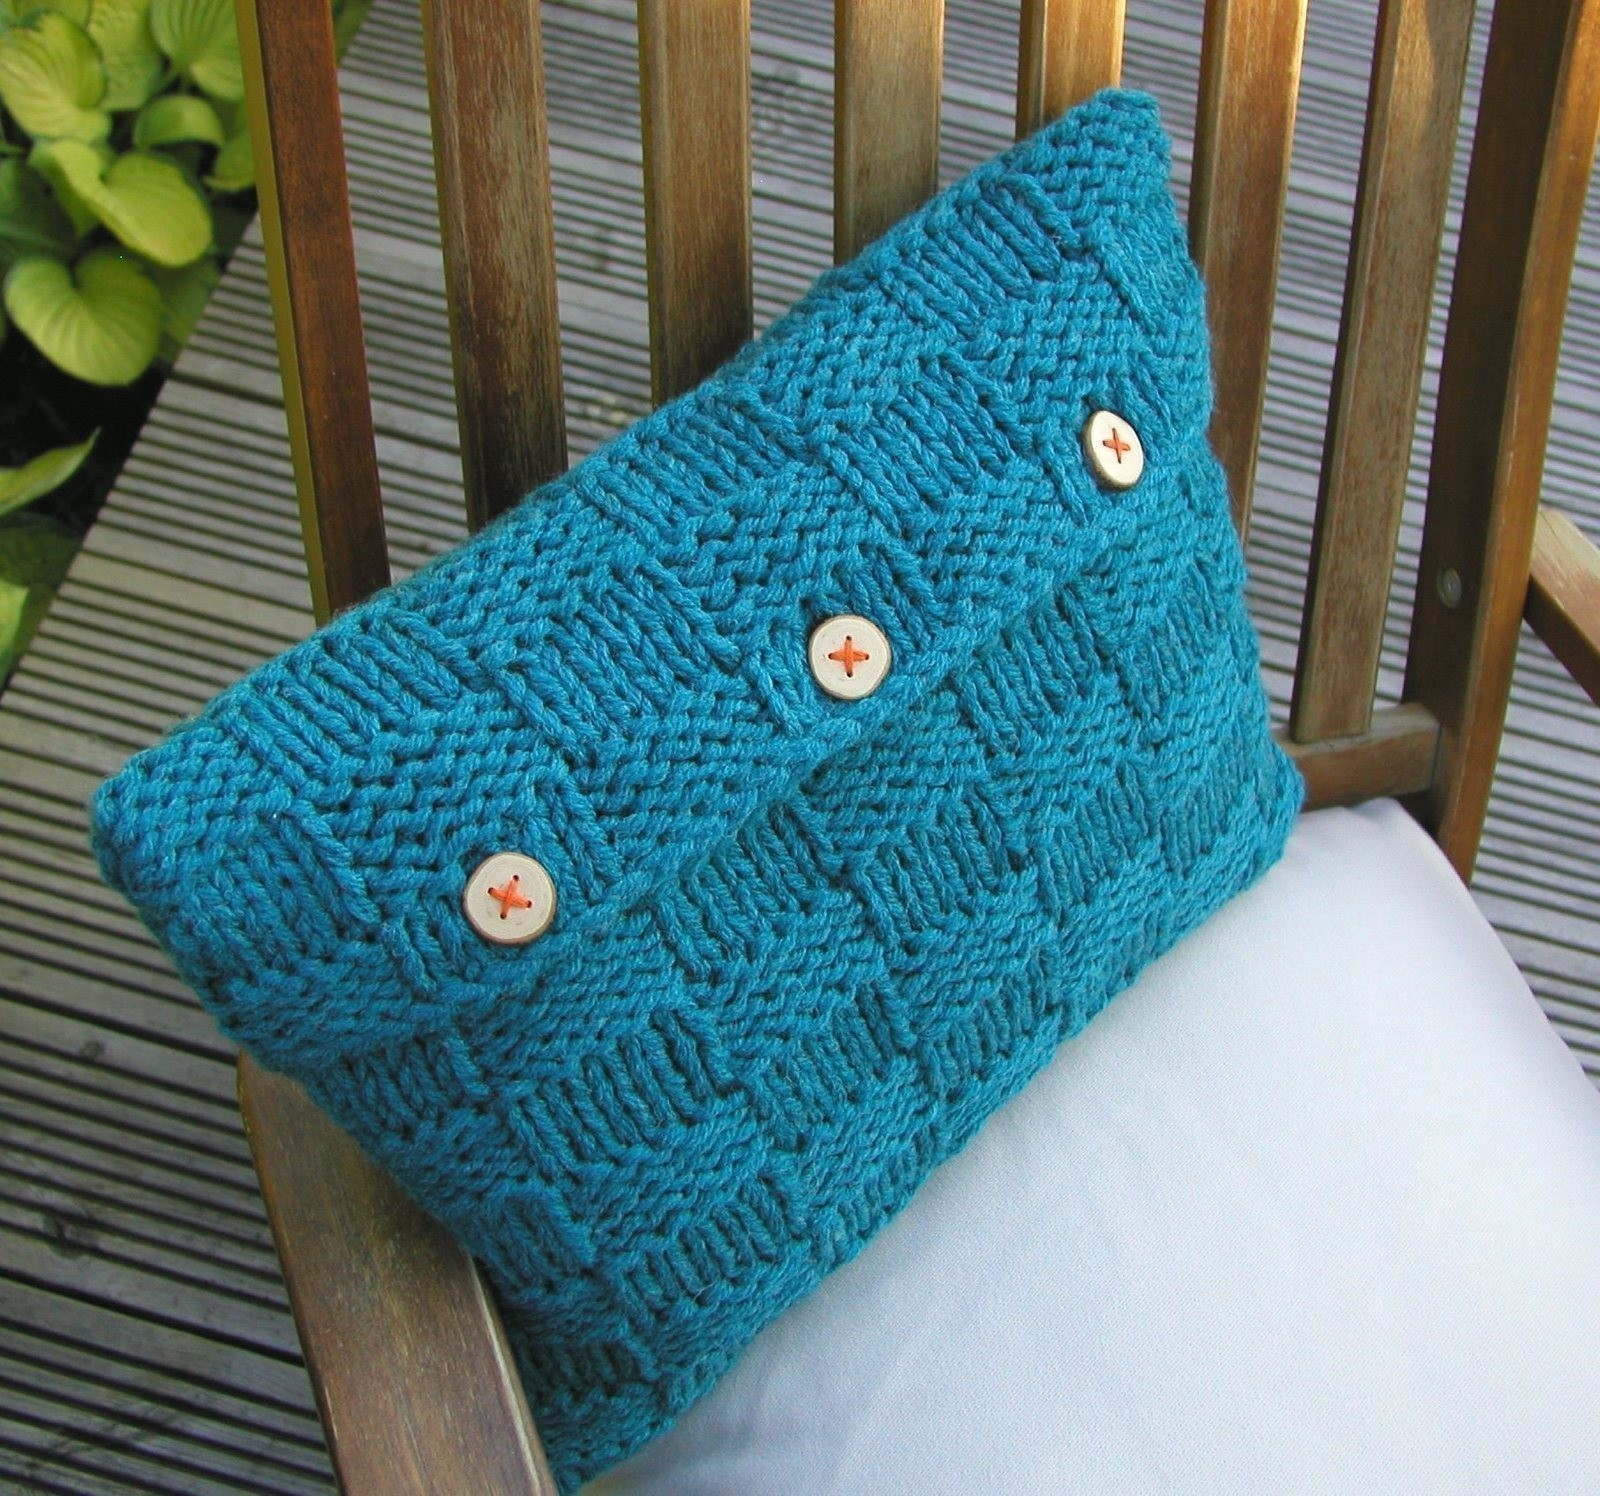 Free Cushion Cover Knitting Pattern Checkerboard Cushion Cover How To Stitch A Knit Or Crochet Cushion